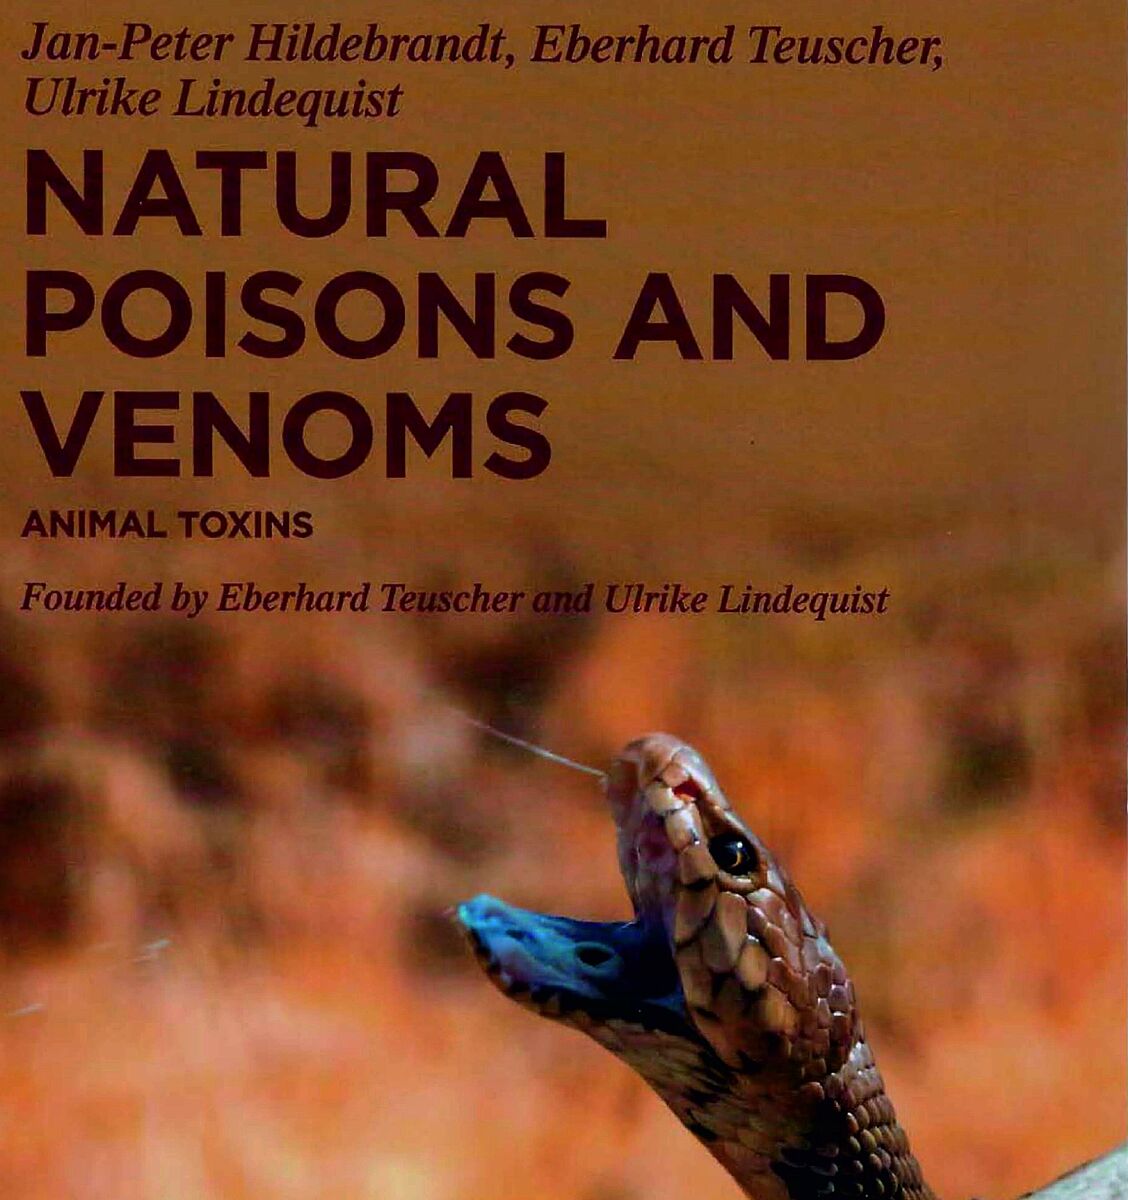 Buchcover: Natural Poisons and Venoms